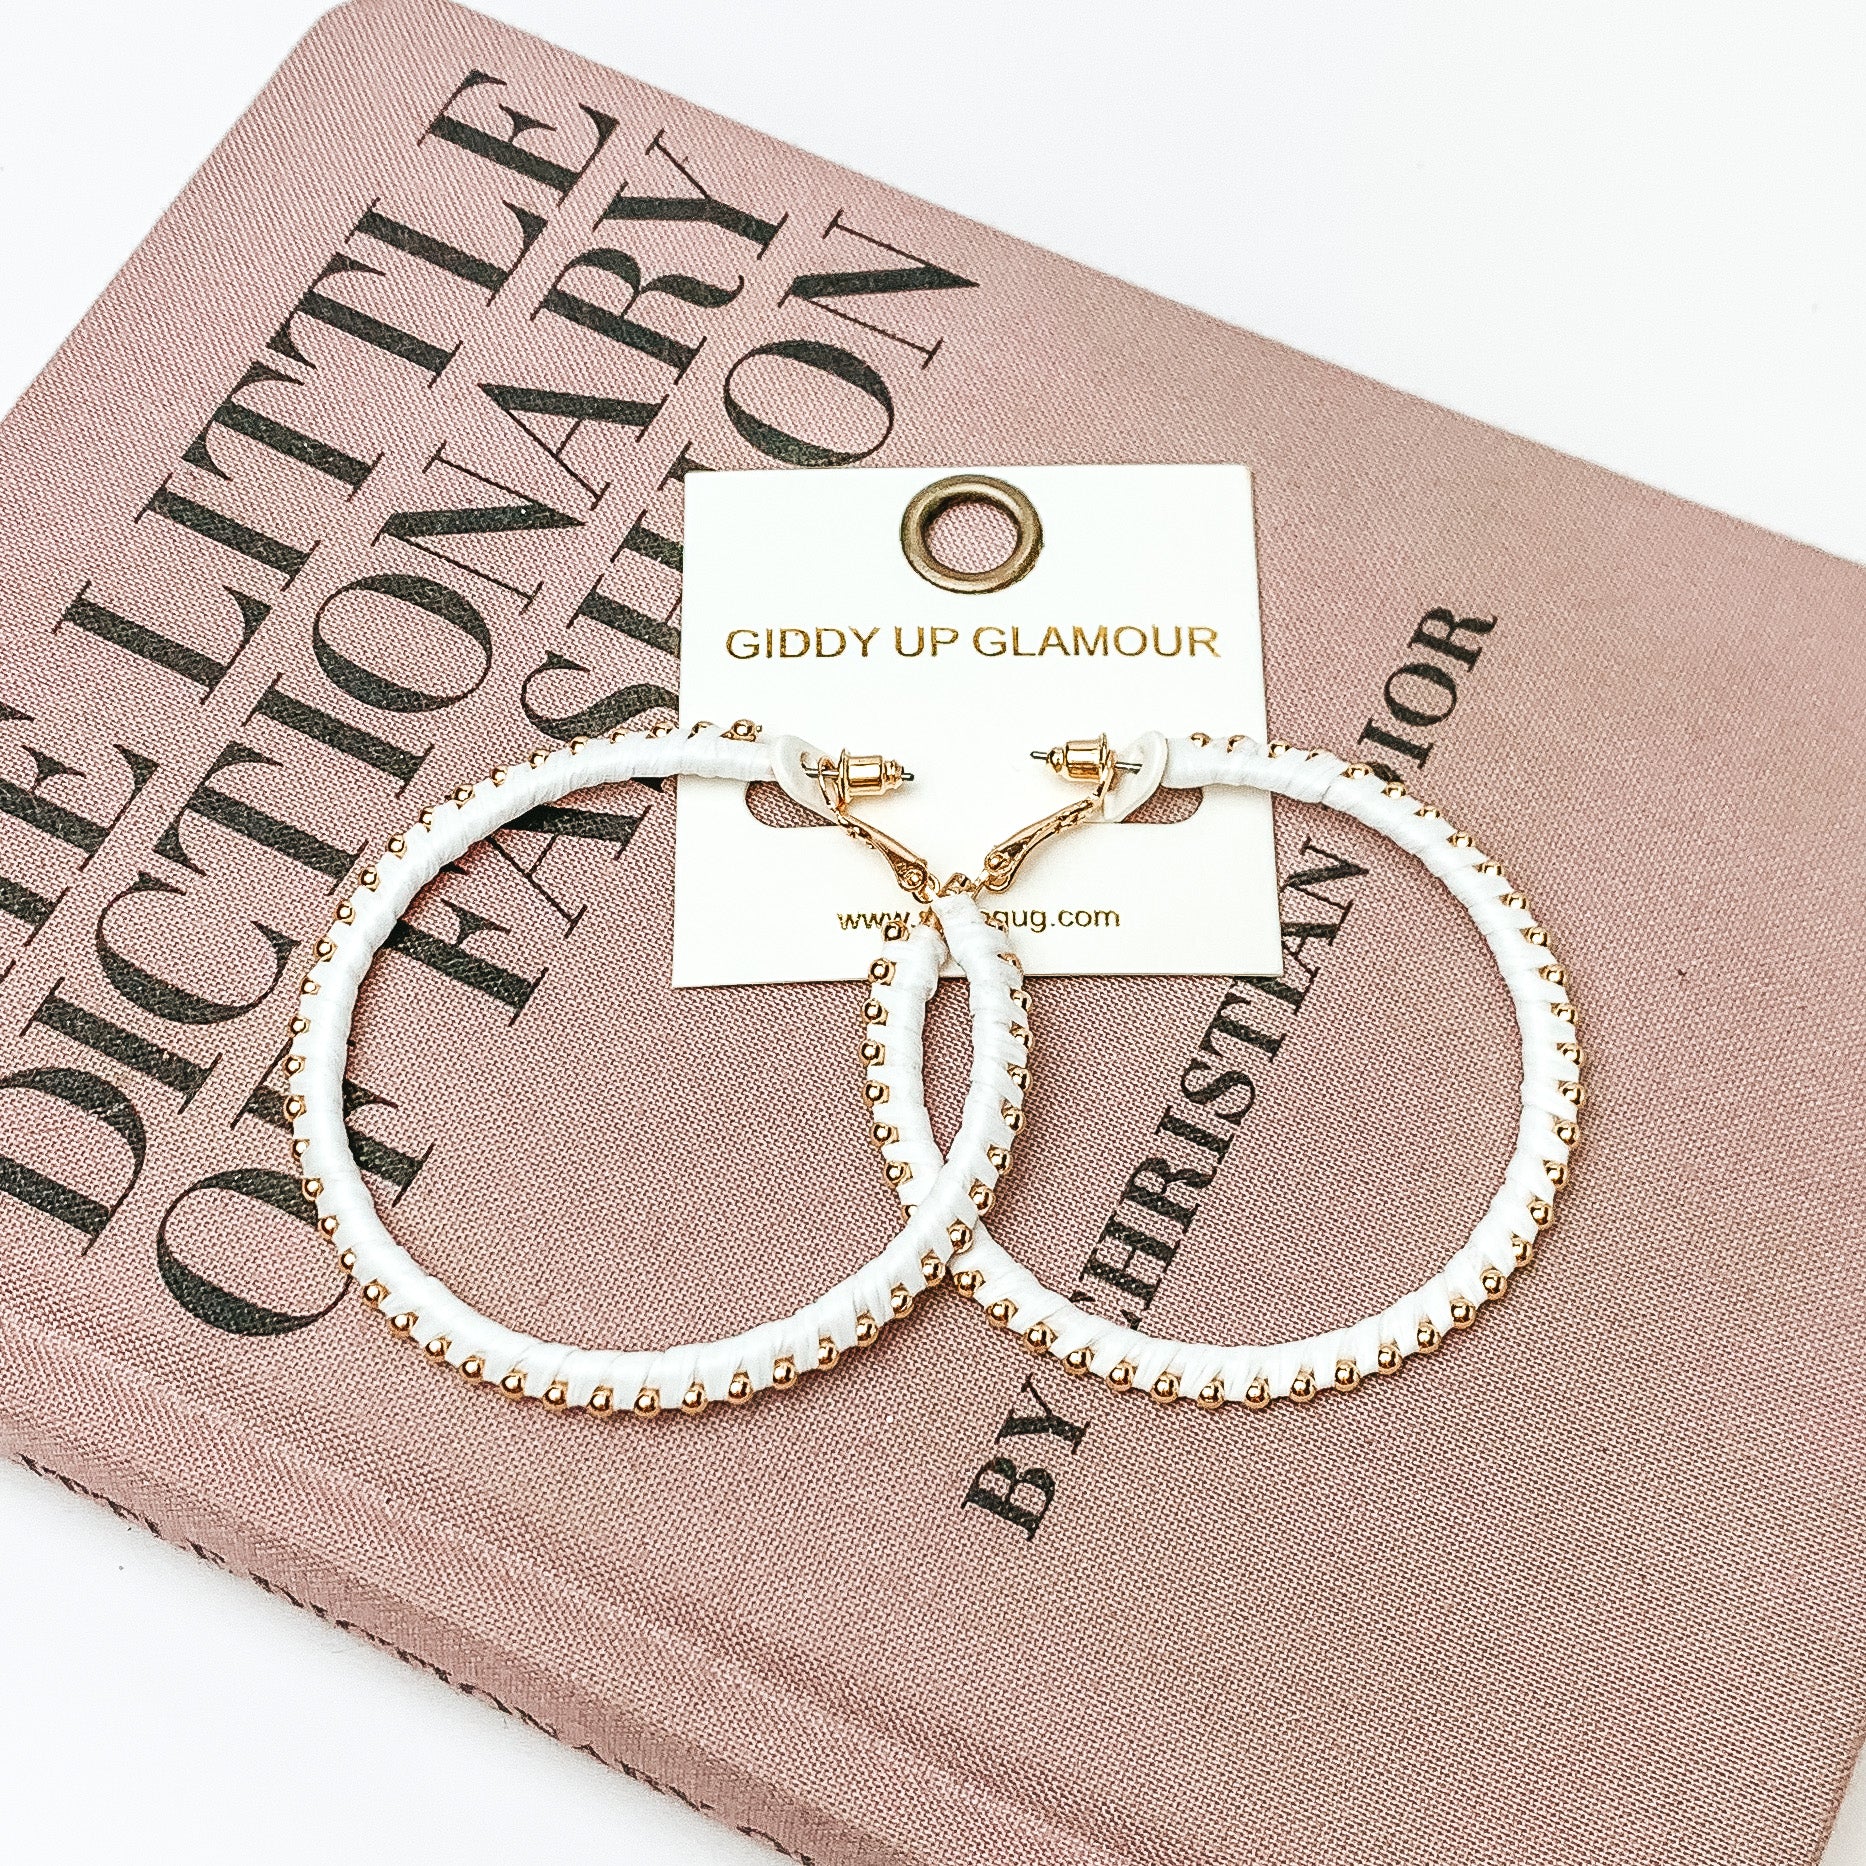 Pictured are circle pure white hoop earrings with gold beads around it. They are pictured with a pink fashion journal on a white background.